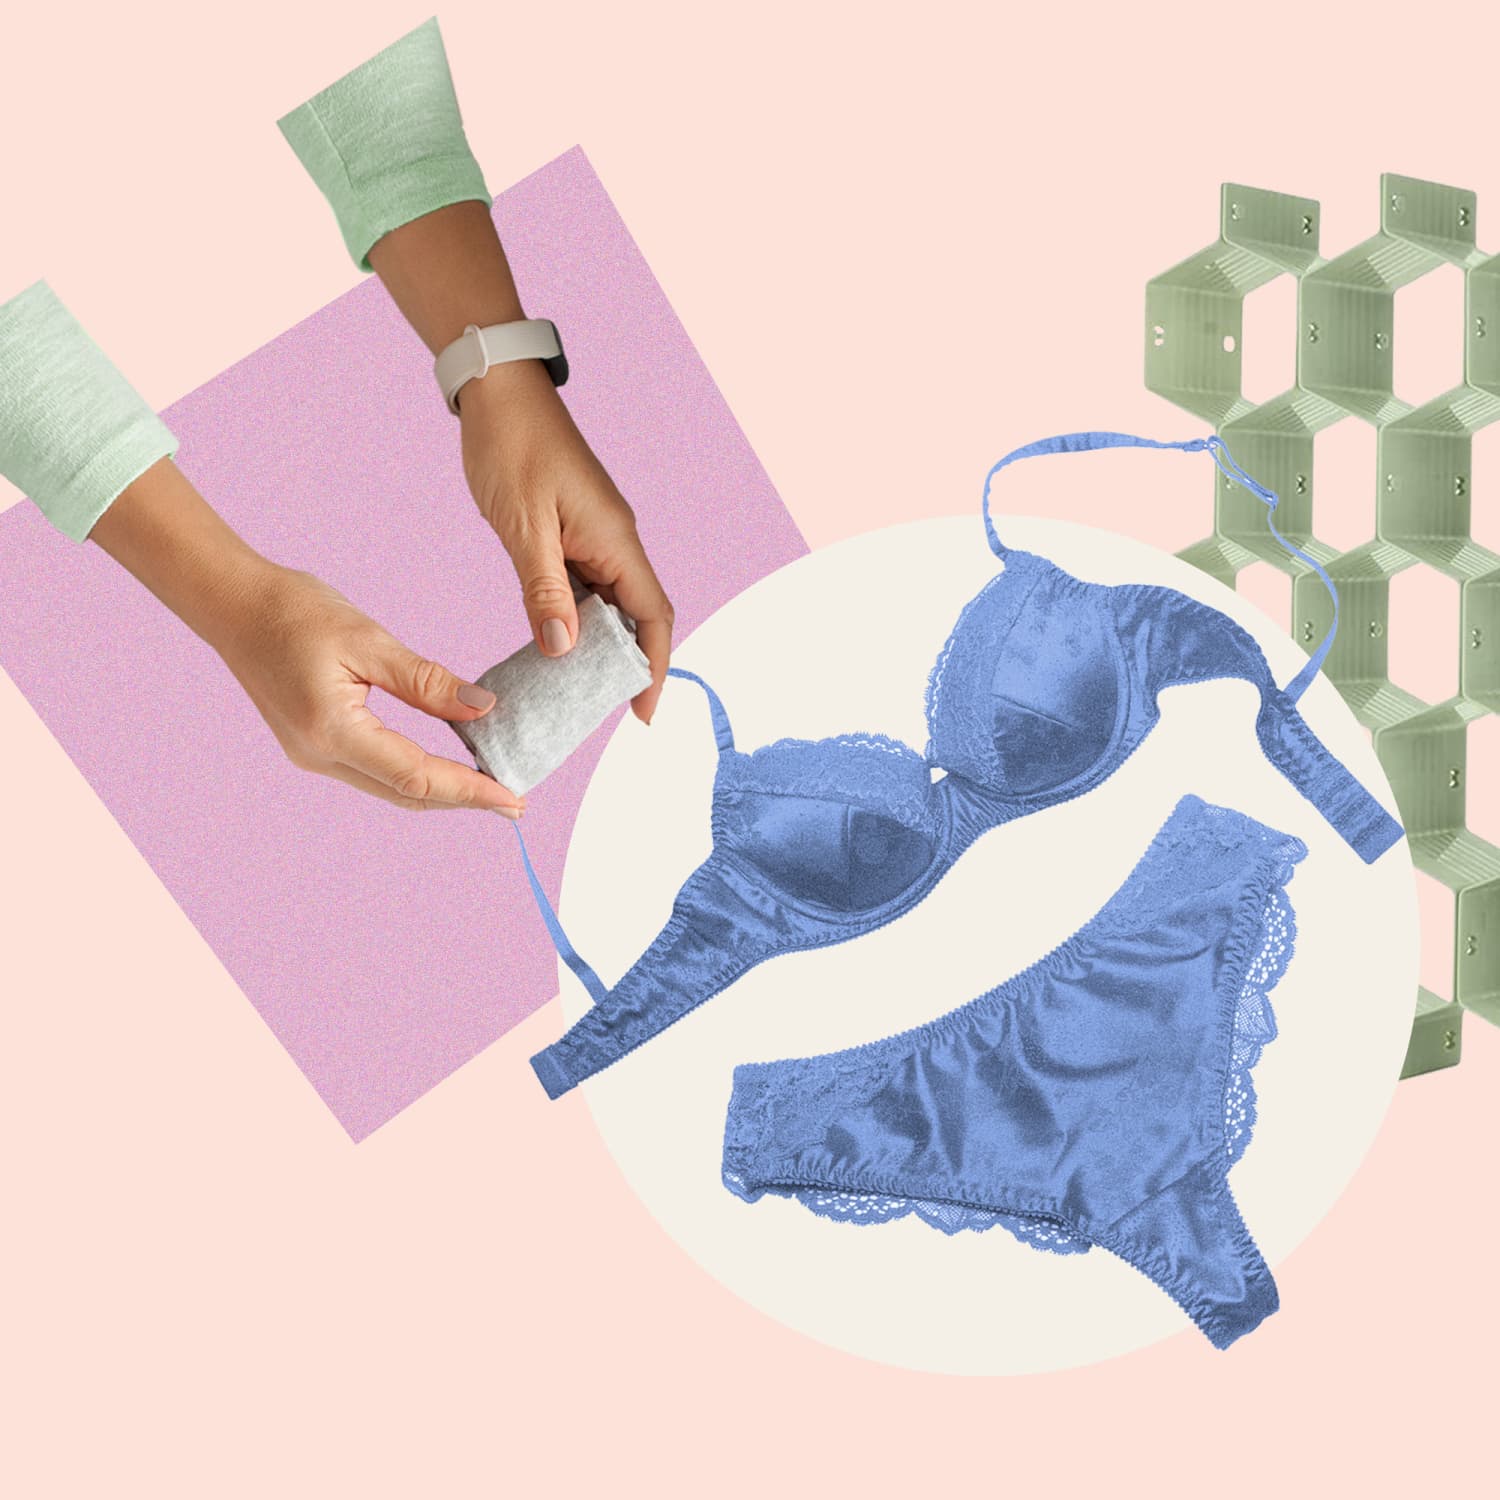 How to wash your underwear - Laundryheap Blog - Laundry & Dry Cleaning